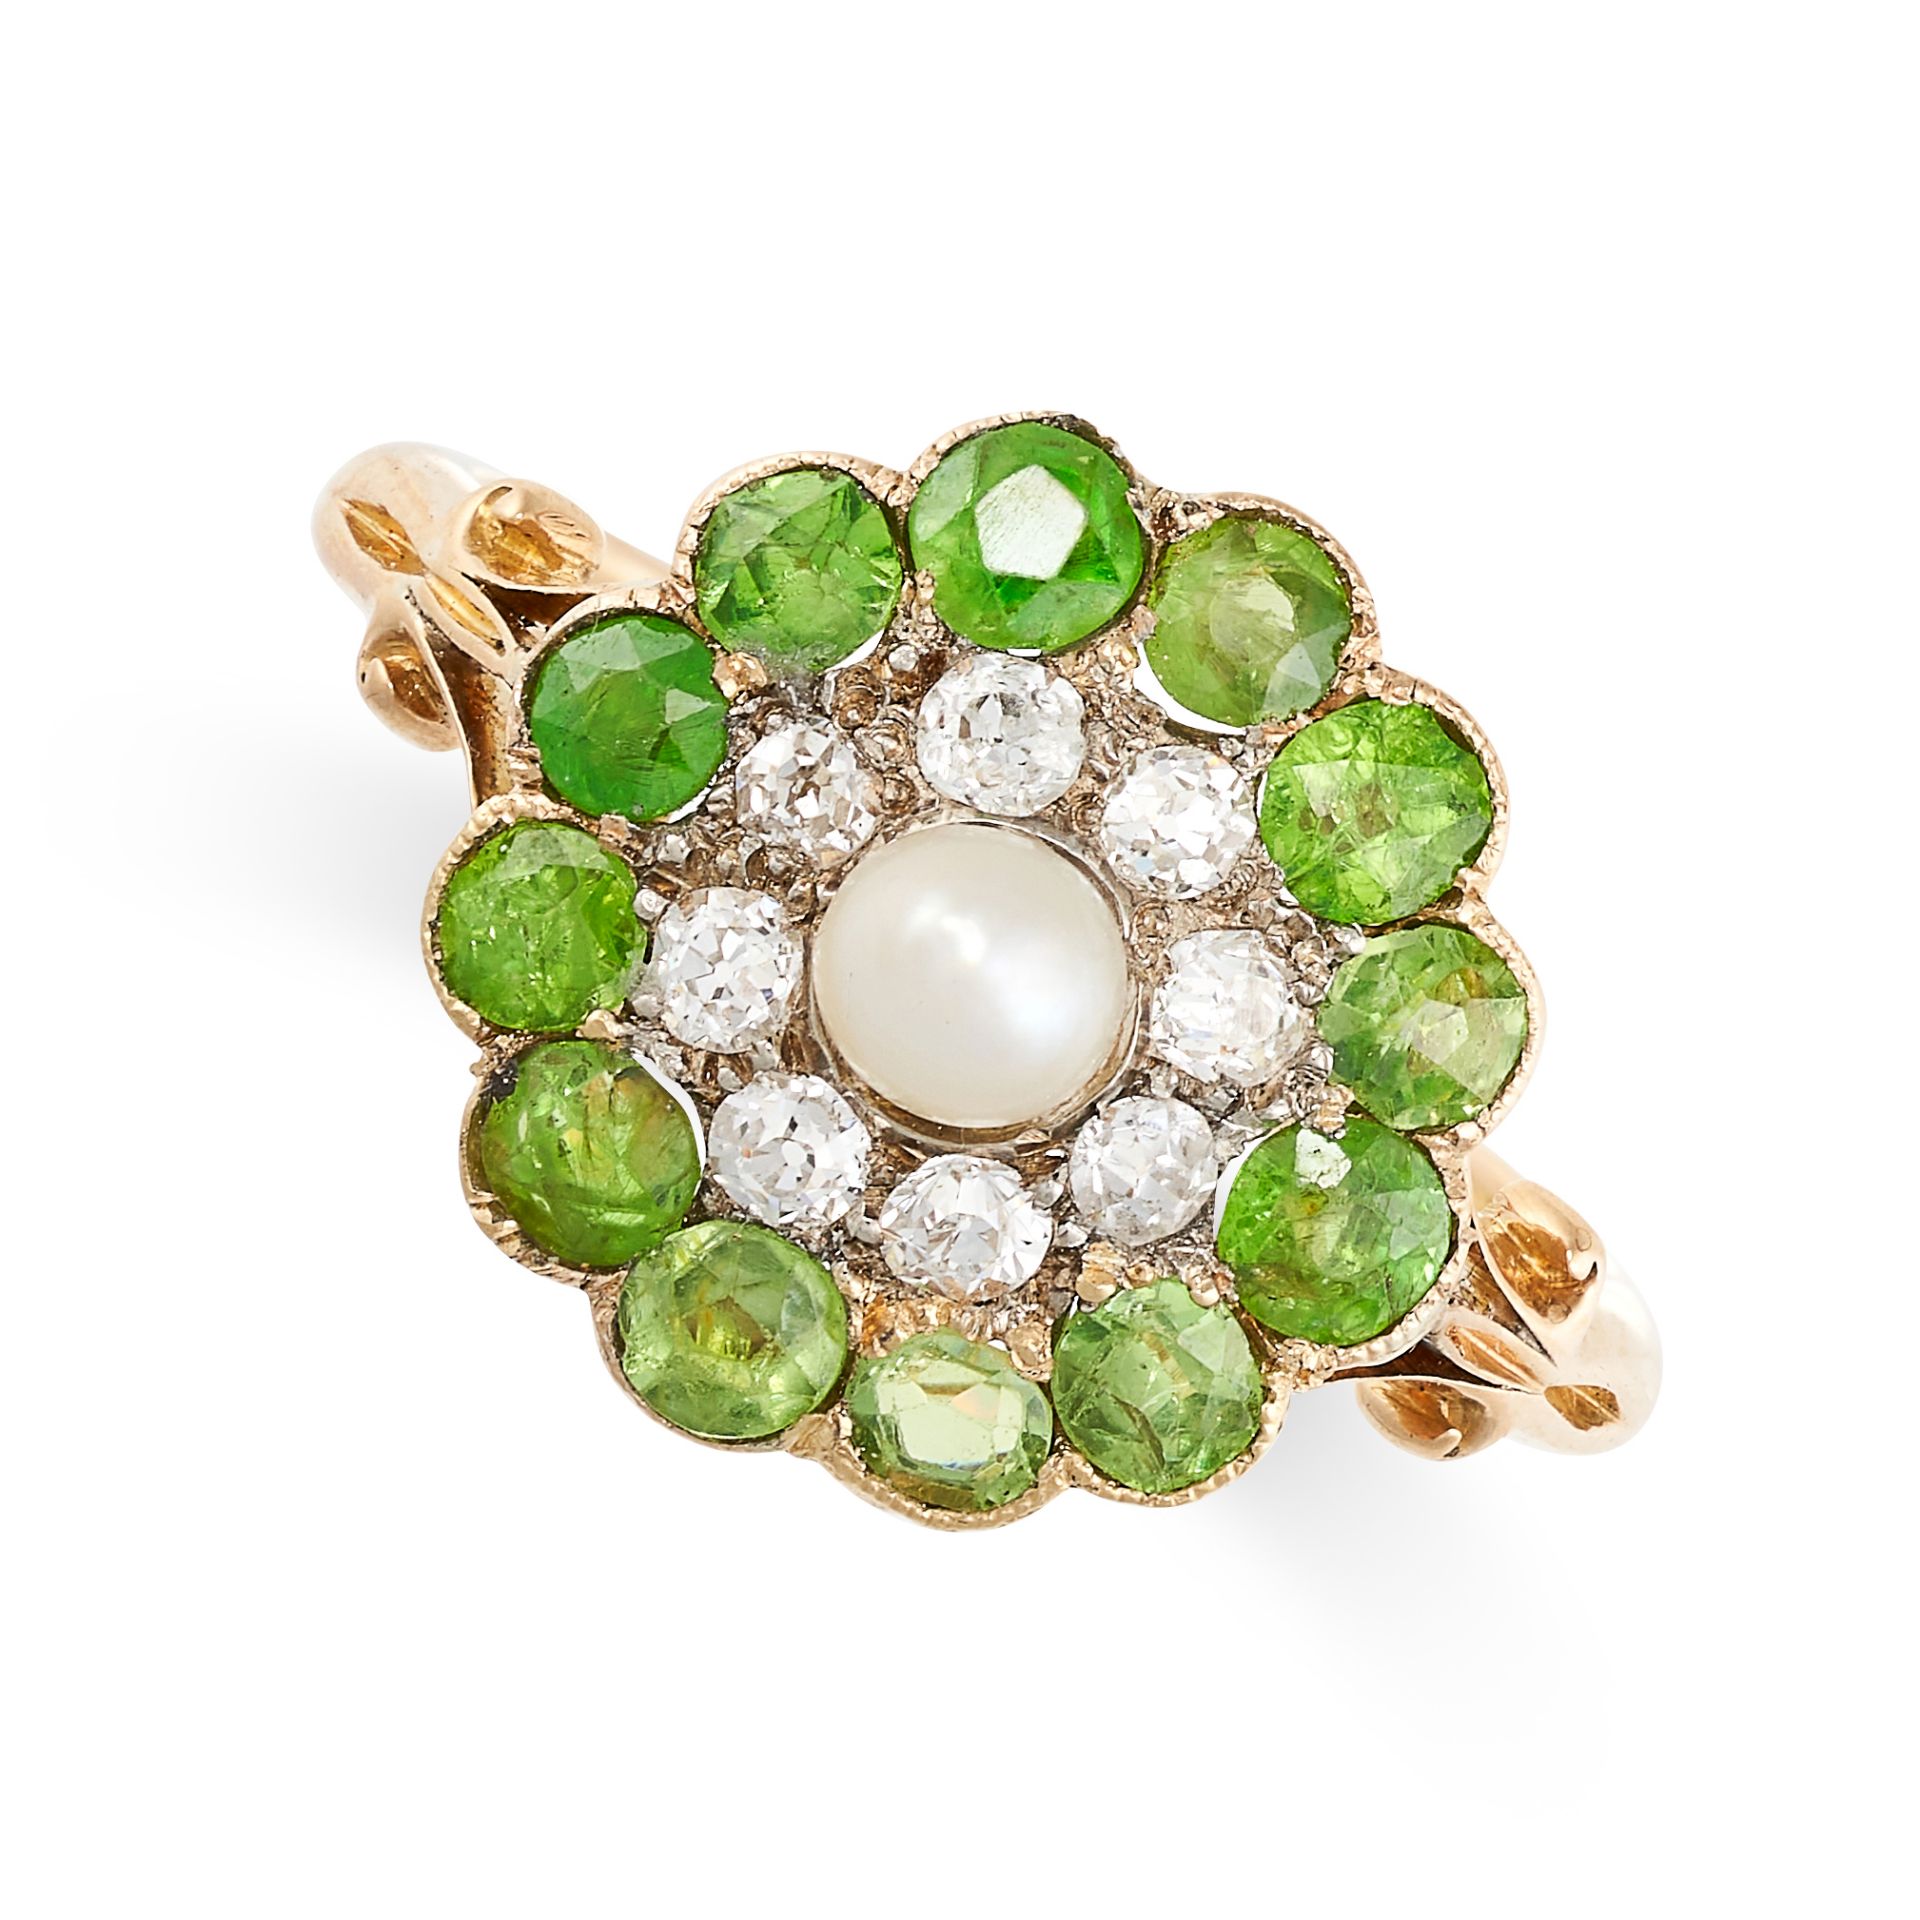 AN ANTIQUE DEMANTOID GARNET, DIAMOND AND PEARL RING in 18ct yellow gold, set with a pearl of 3.